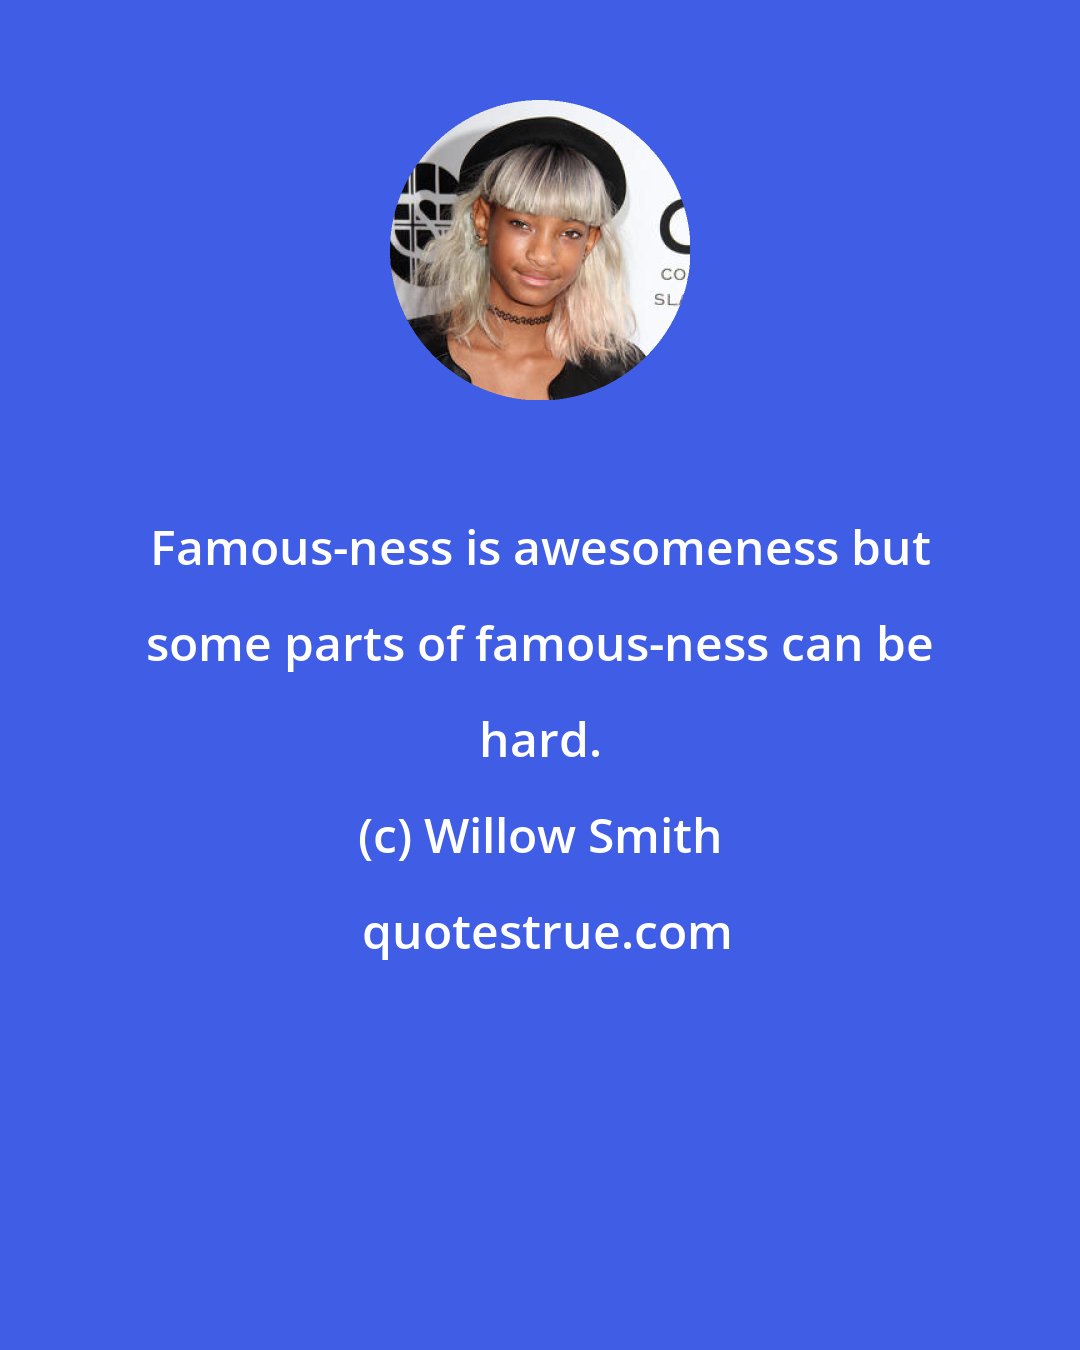 Willow Smith: Famous-ness is awesomeness but some parts of famous-ness can be hard.